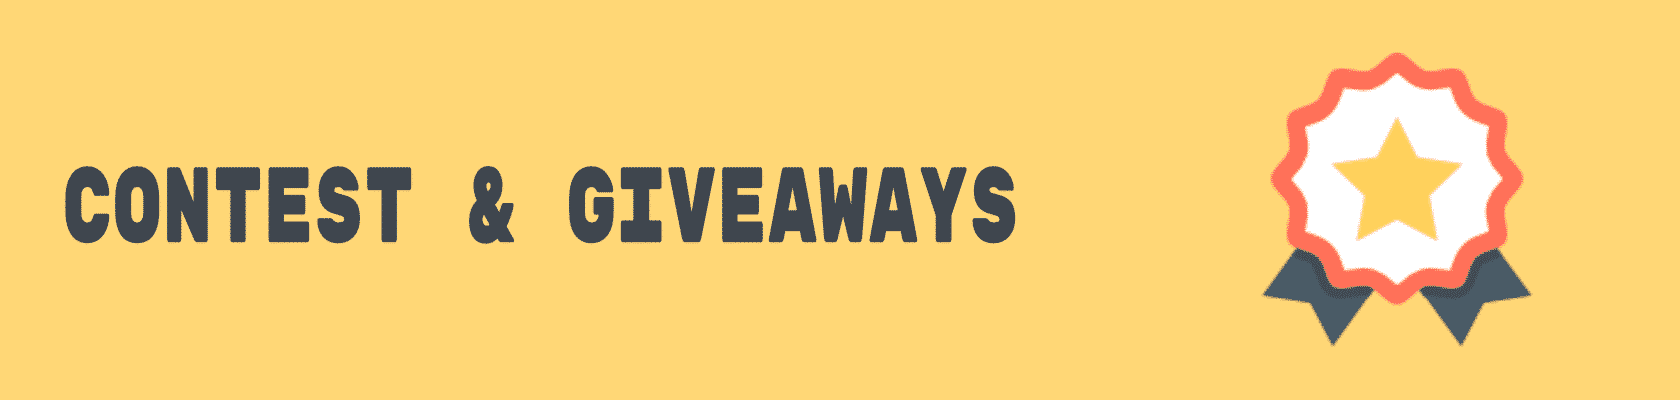 Contest & Giveaways